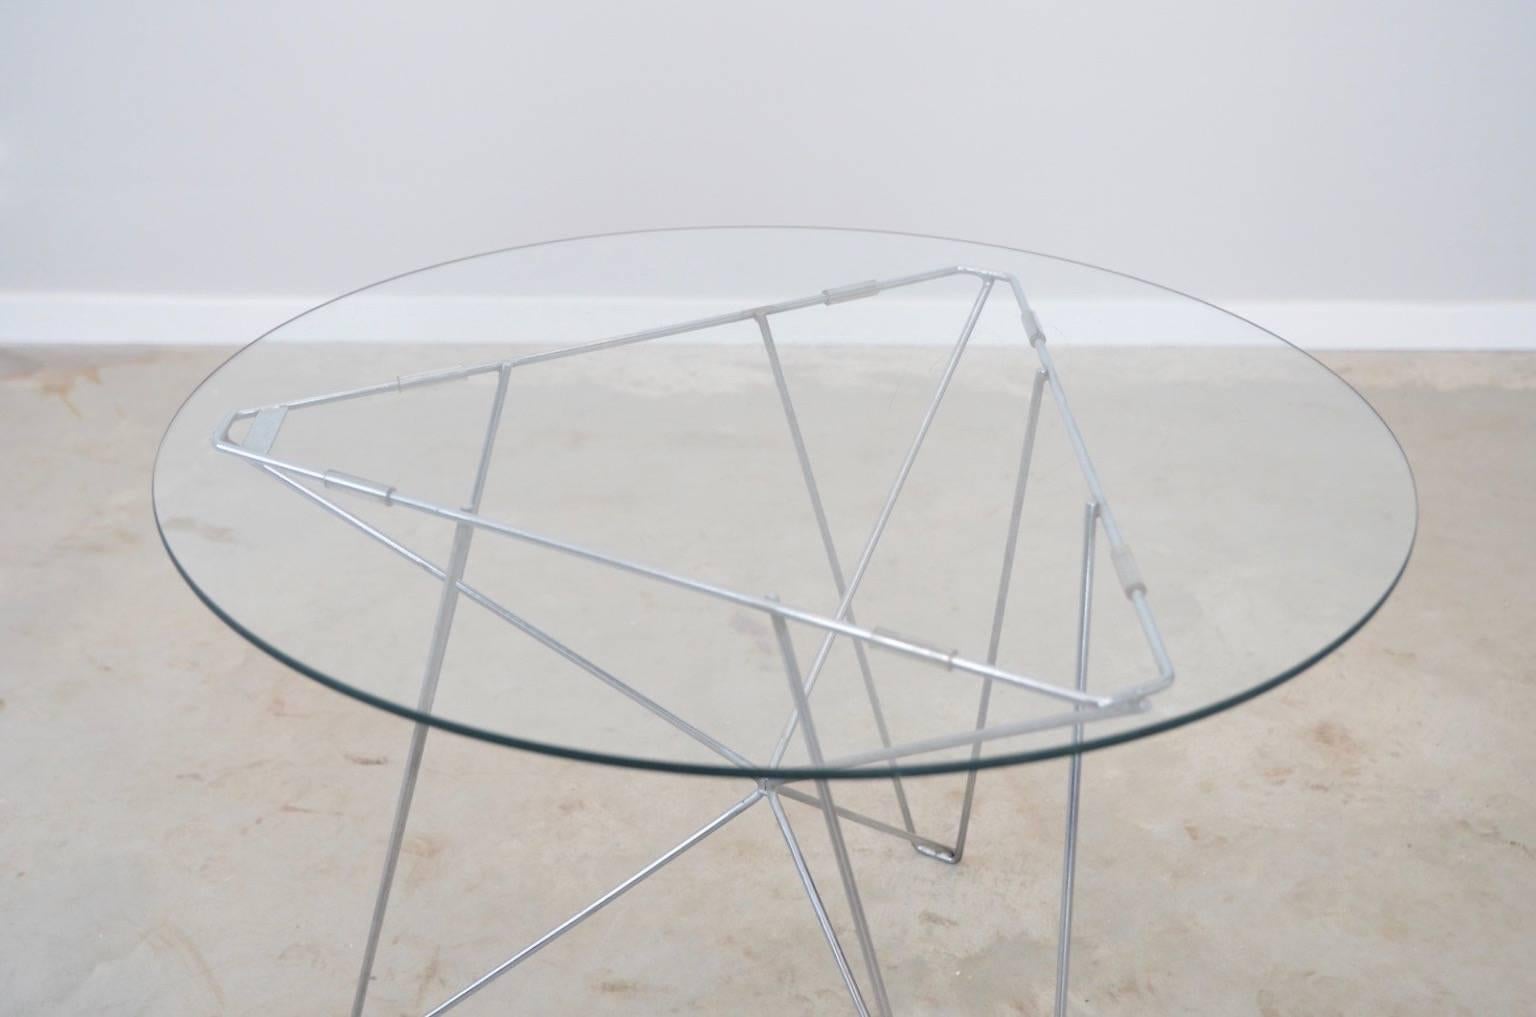 Welded IJhorst Coffee Table by Cobra Co-Founder Constant Nieuwenhuys for 't Spectrum